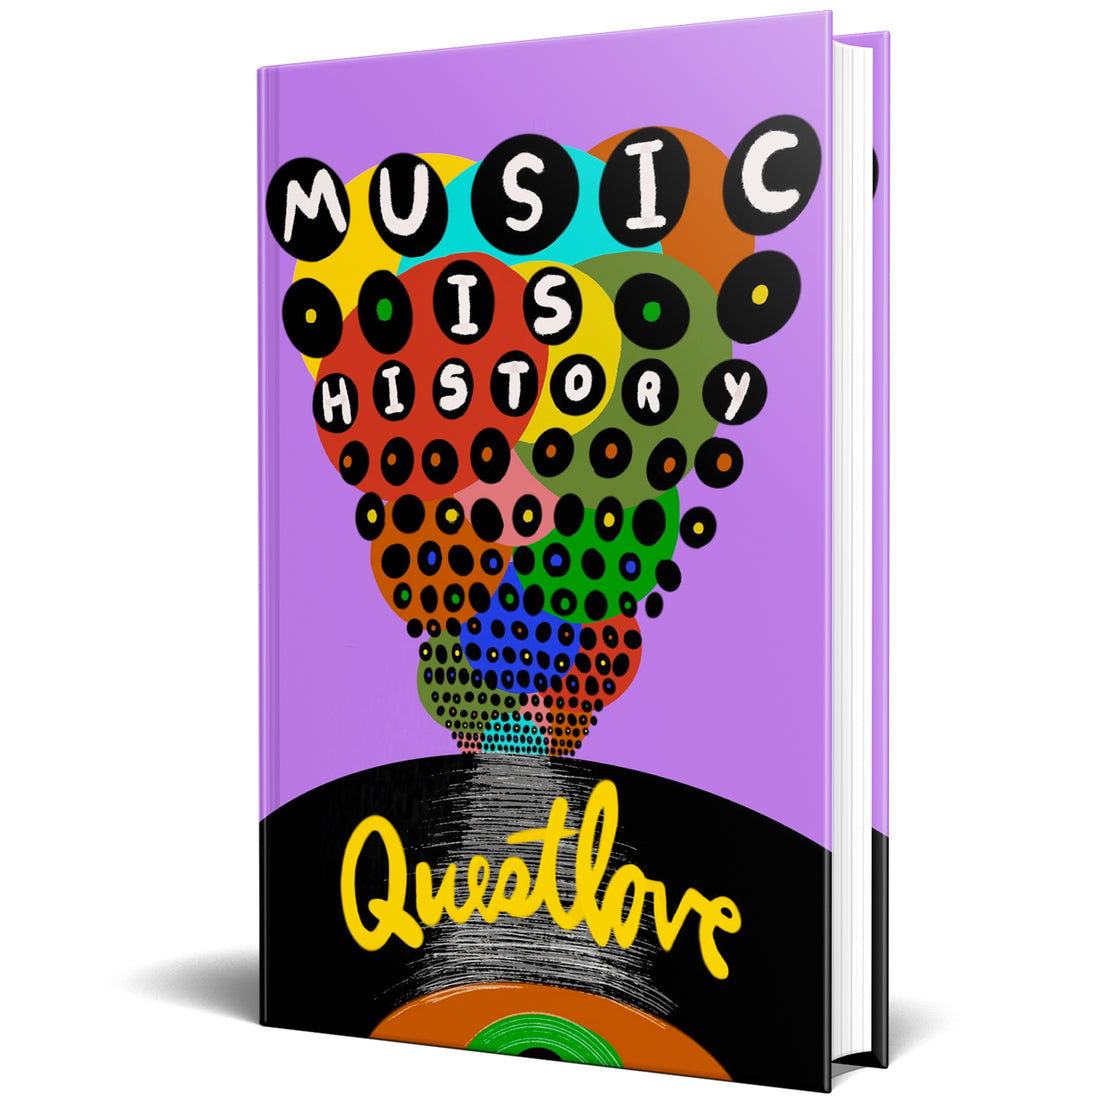 Questlove "Music Is History" Book